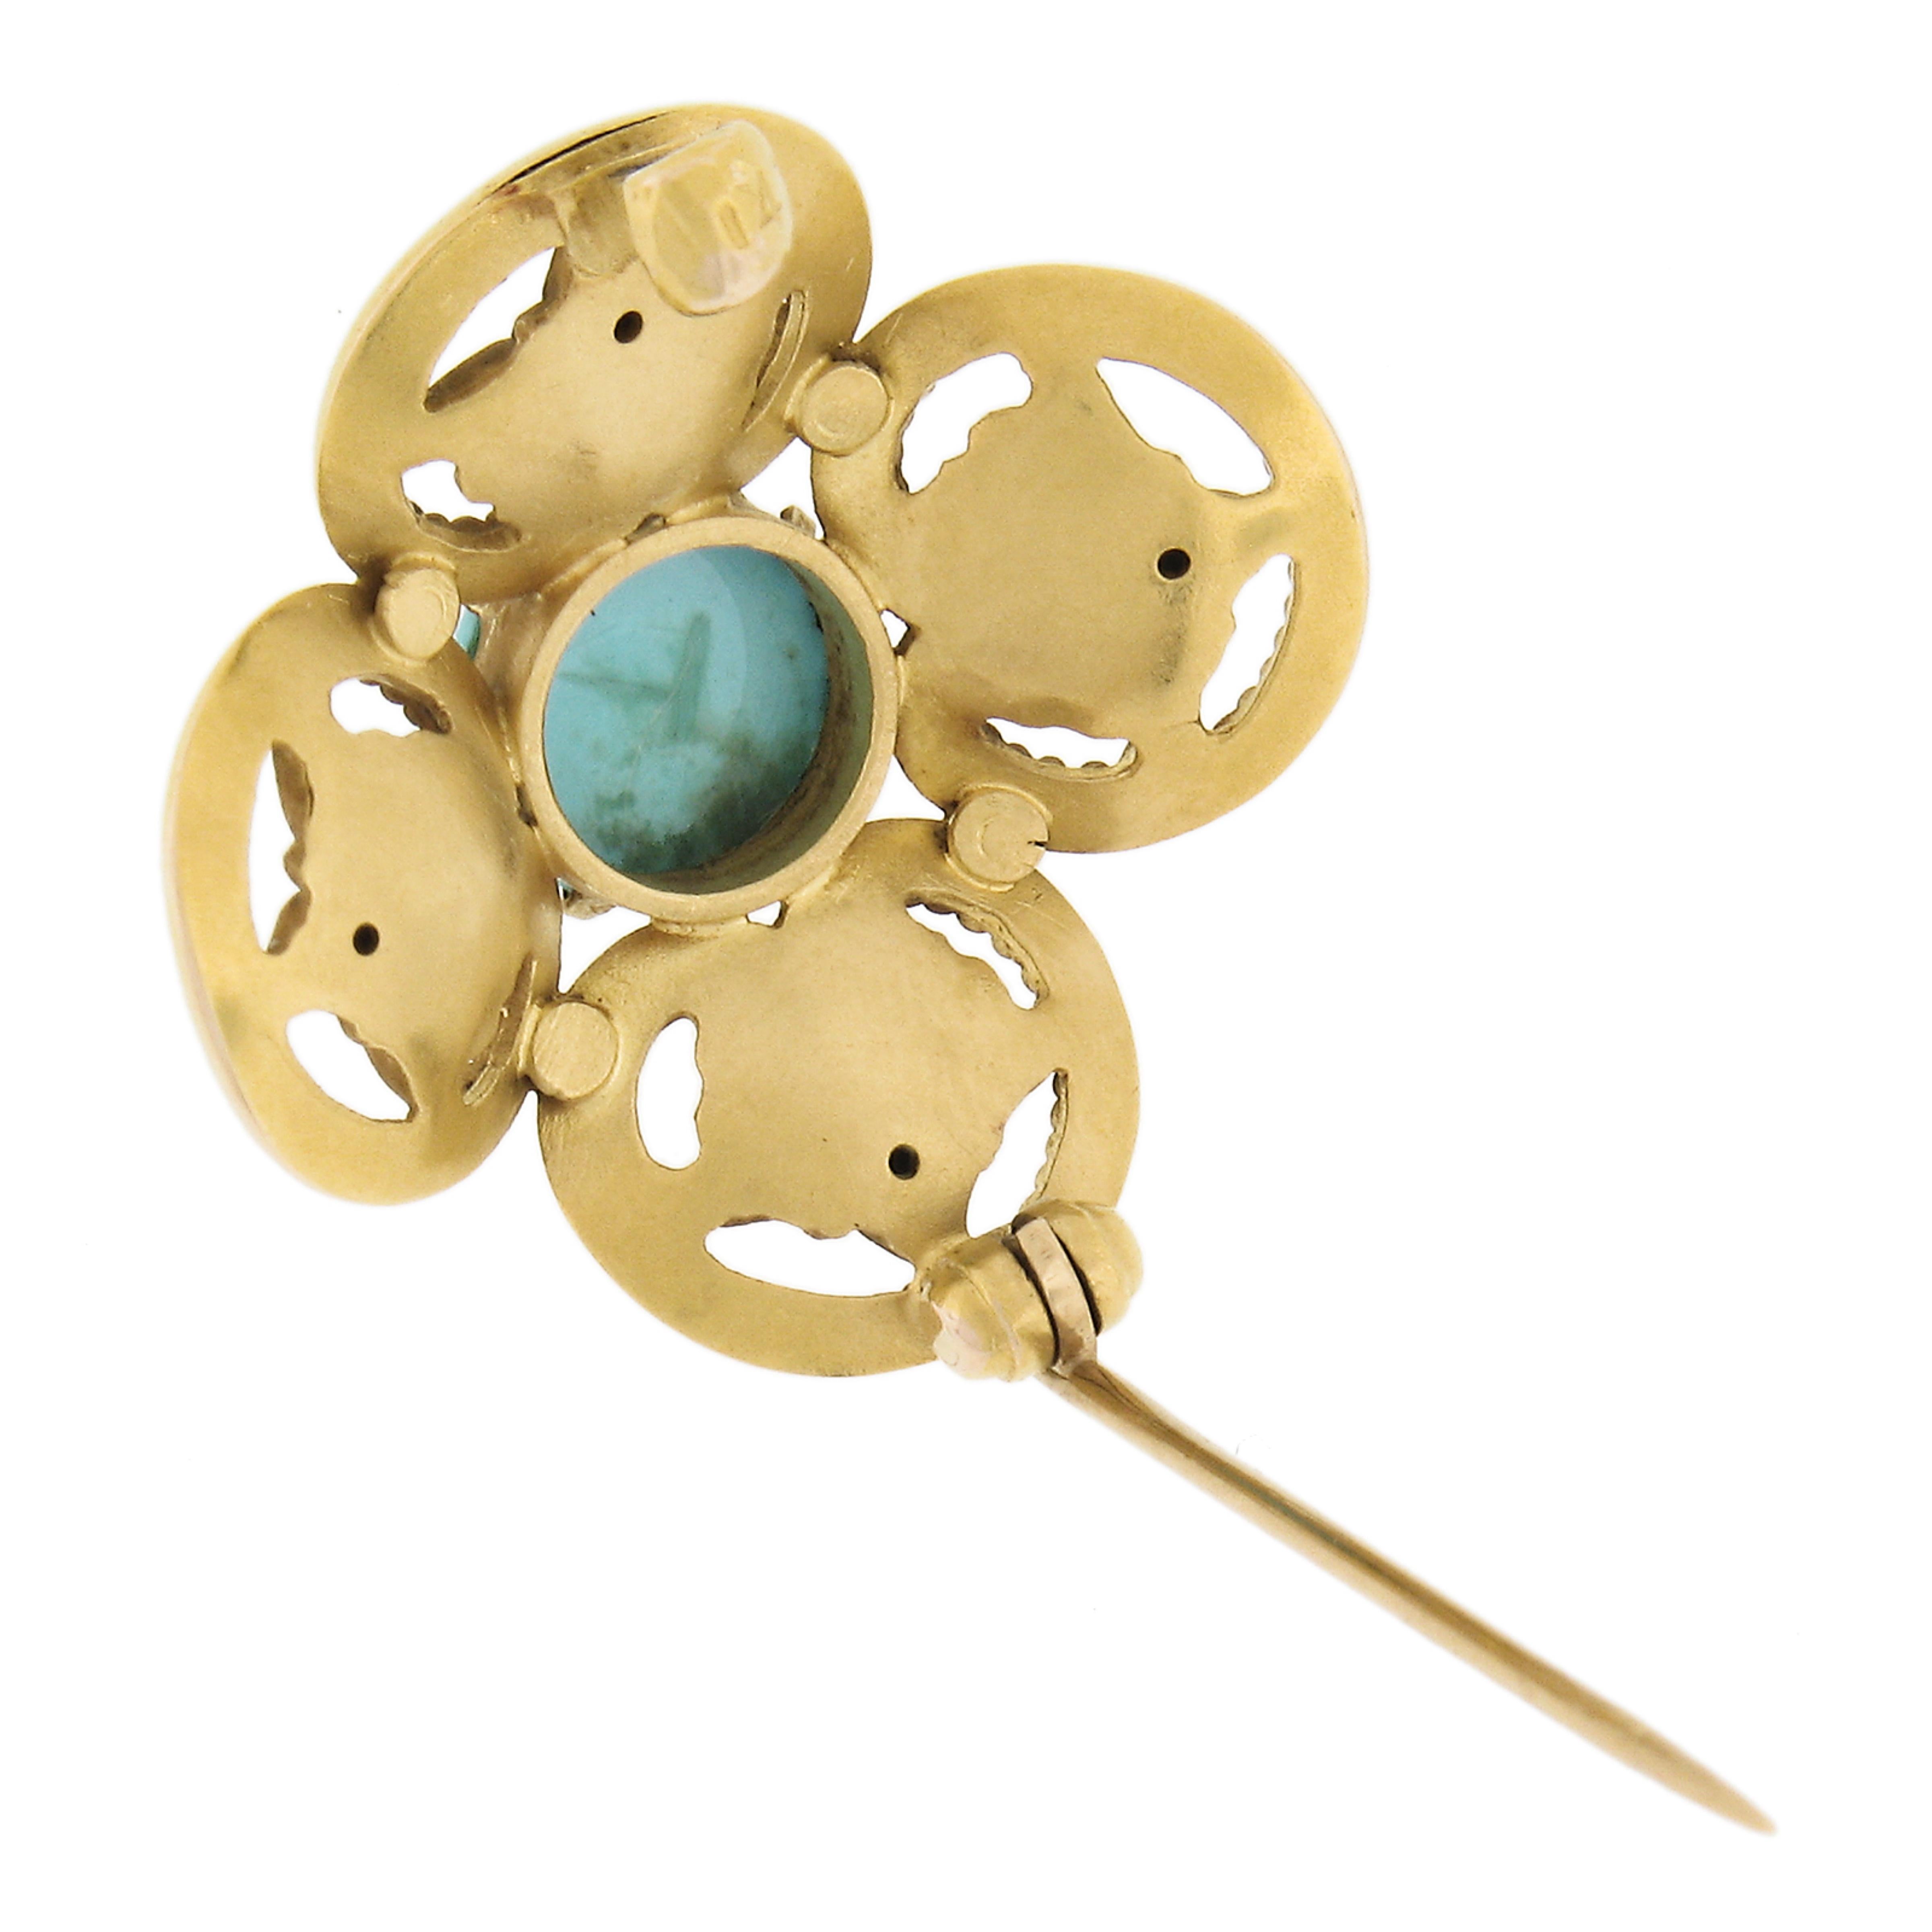 Antique Art Nouveau 14k Yellow Gold 8mm Turquoise Detailed Flower Pin Brooch In Excellent Condition For Sale In Montclair, NJ